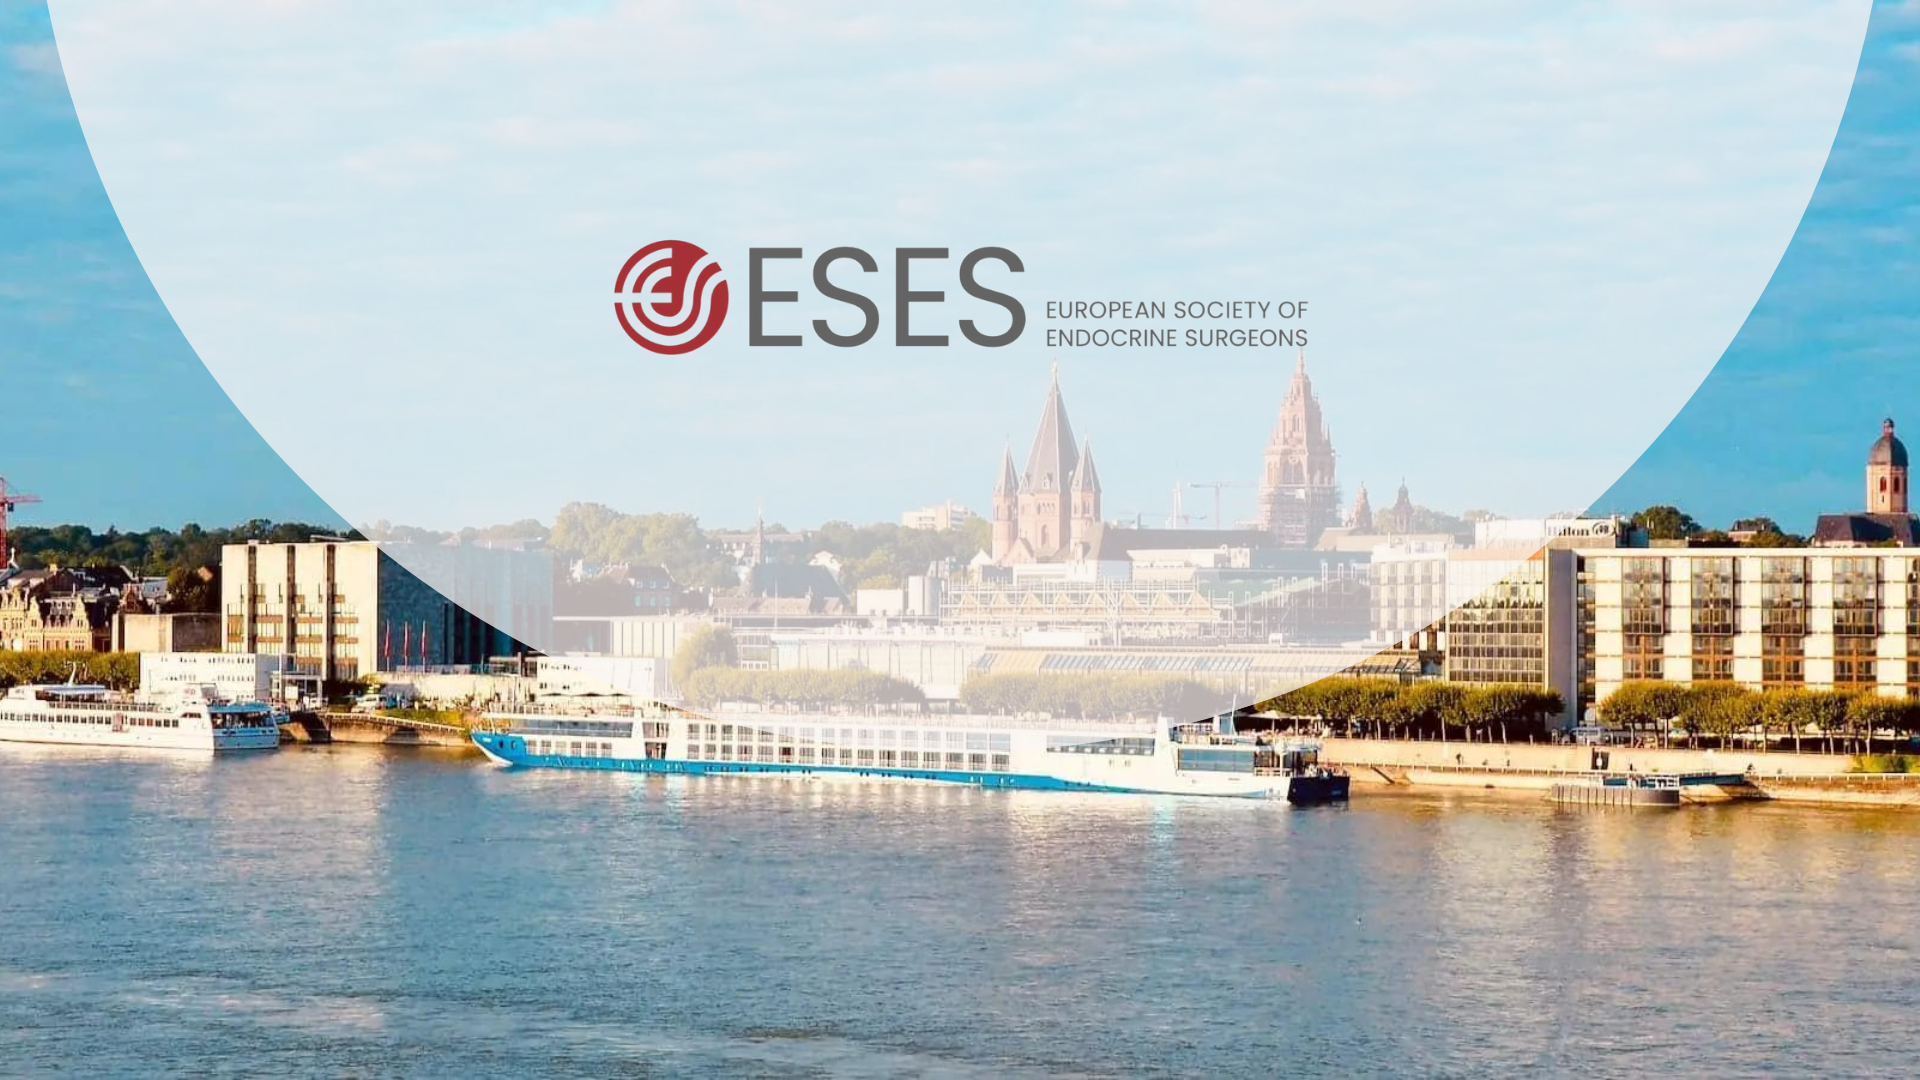 10th Conference of European Society of Endocrine Surgeons 2023